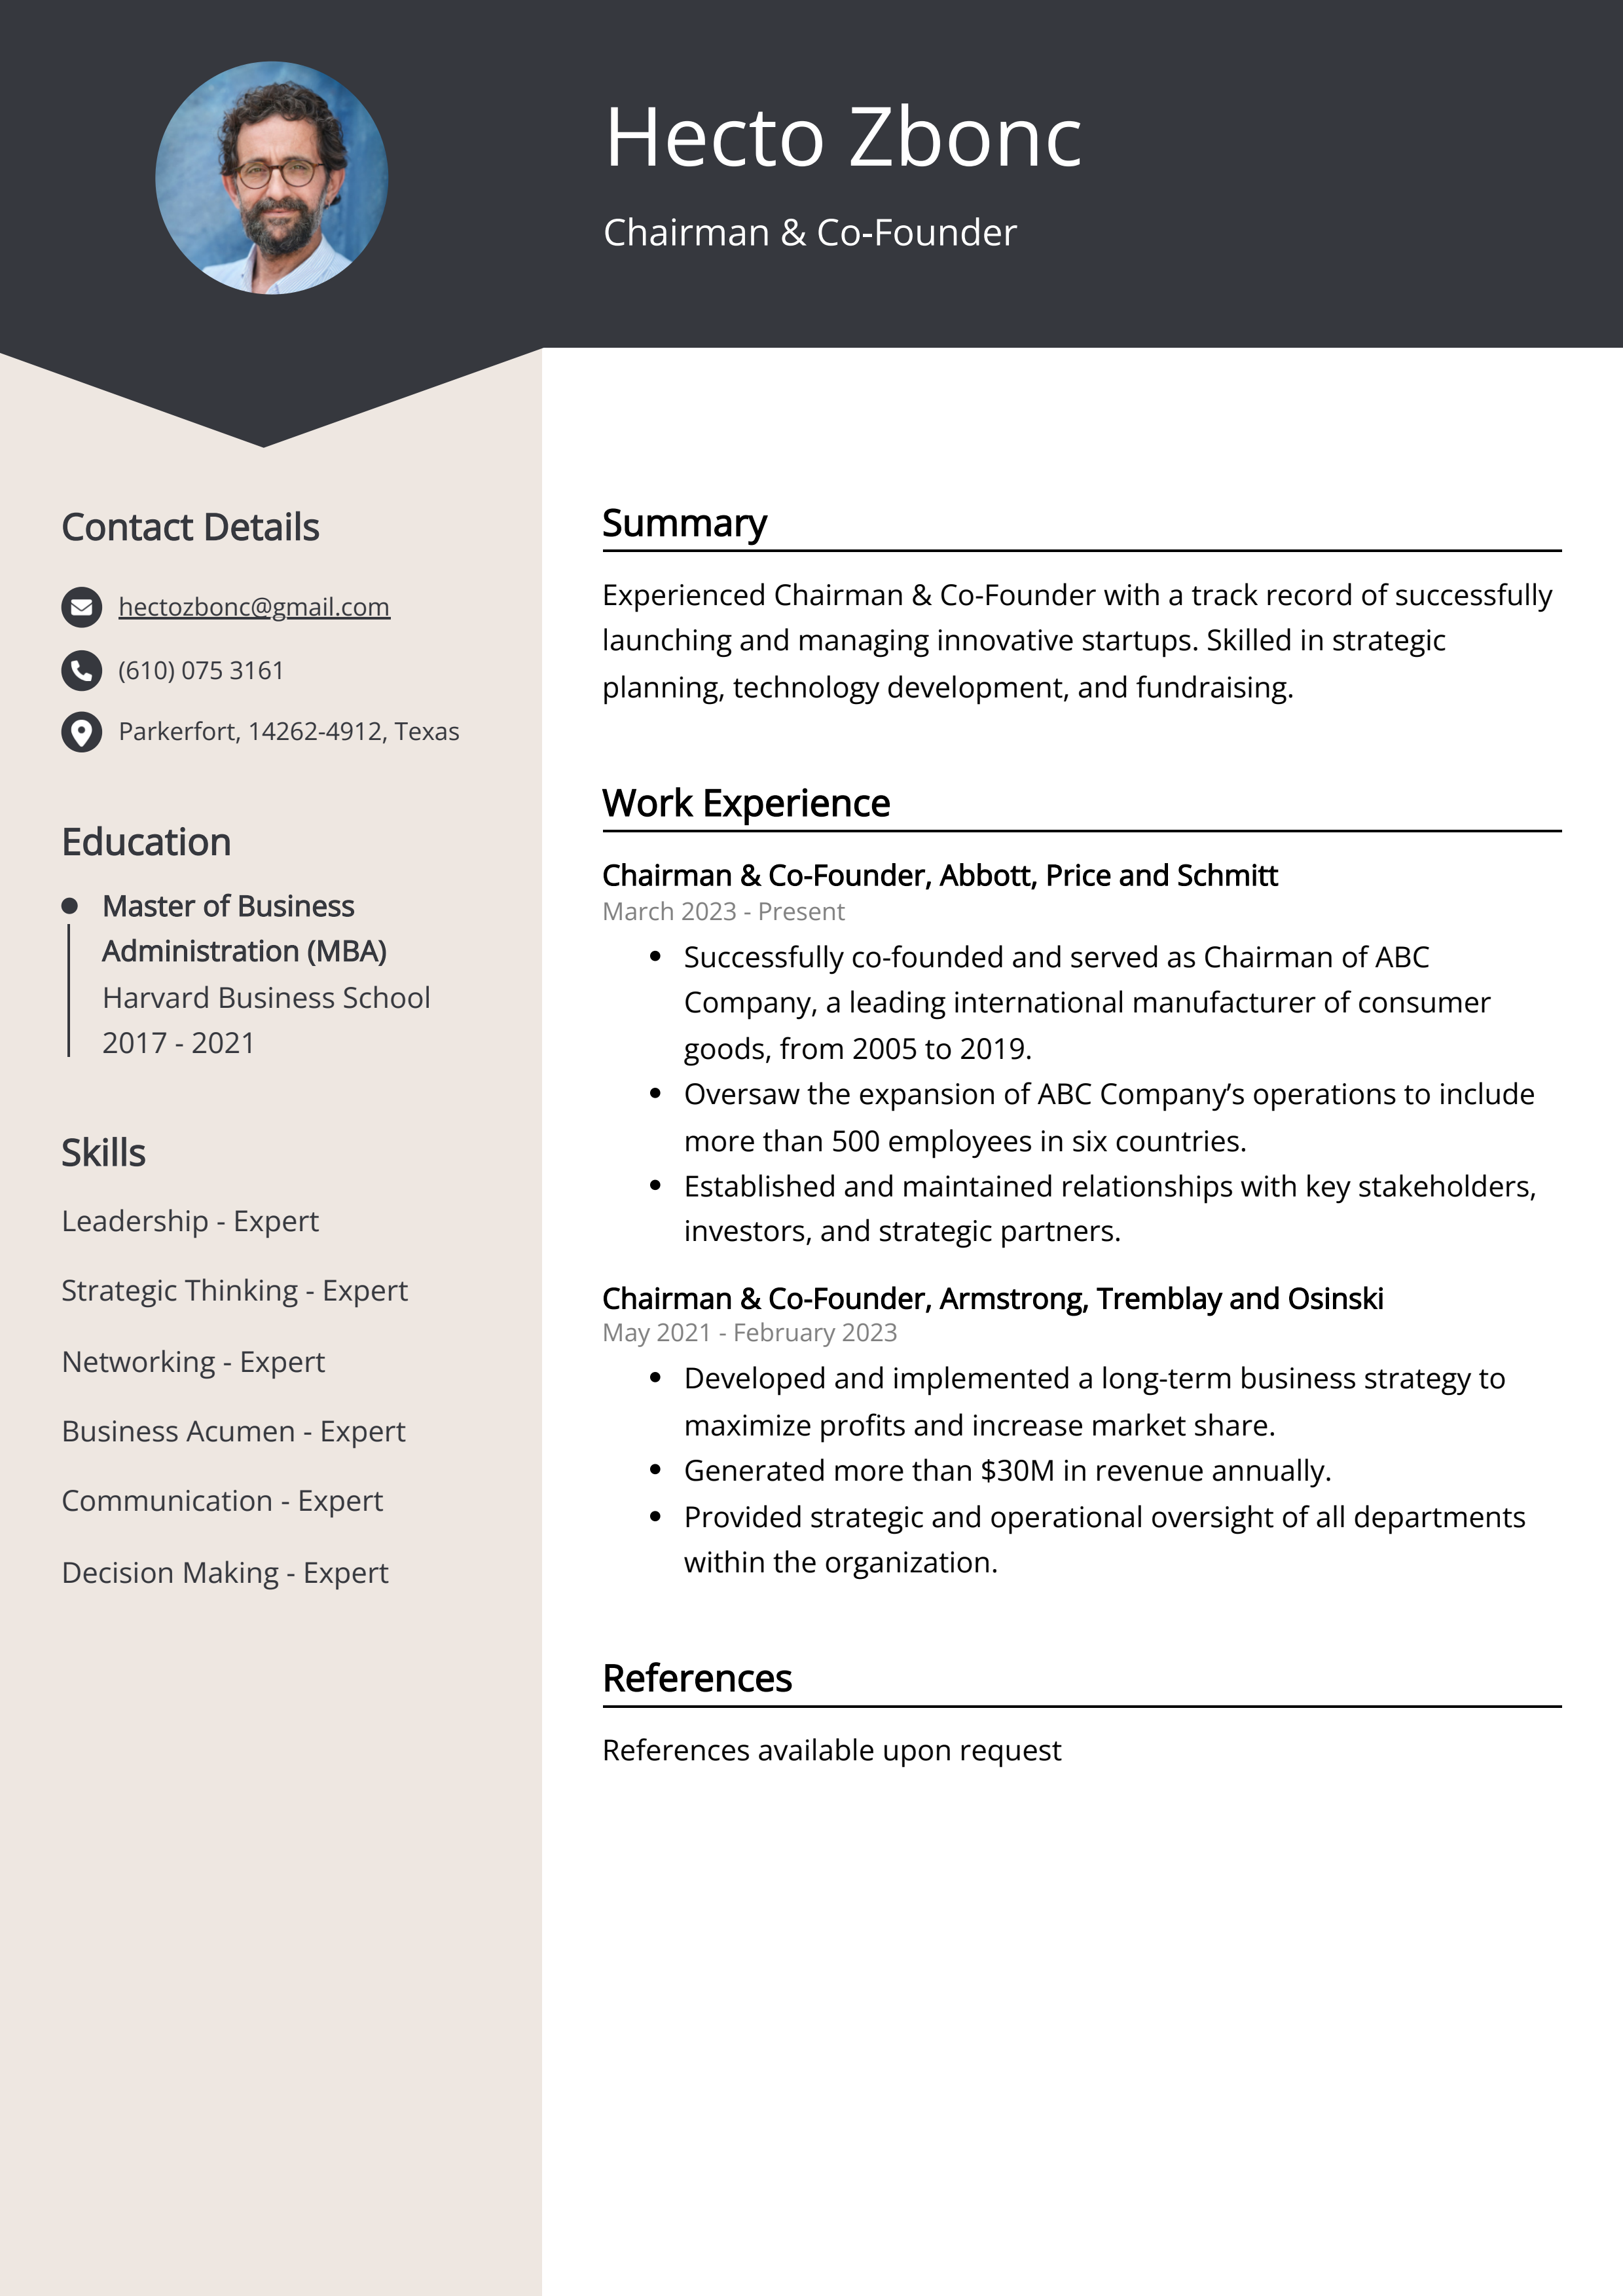 Chairman & Co-Founder Resume Example